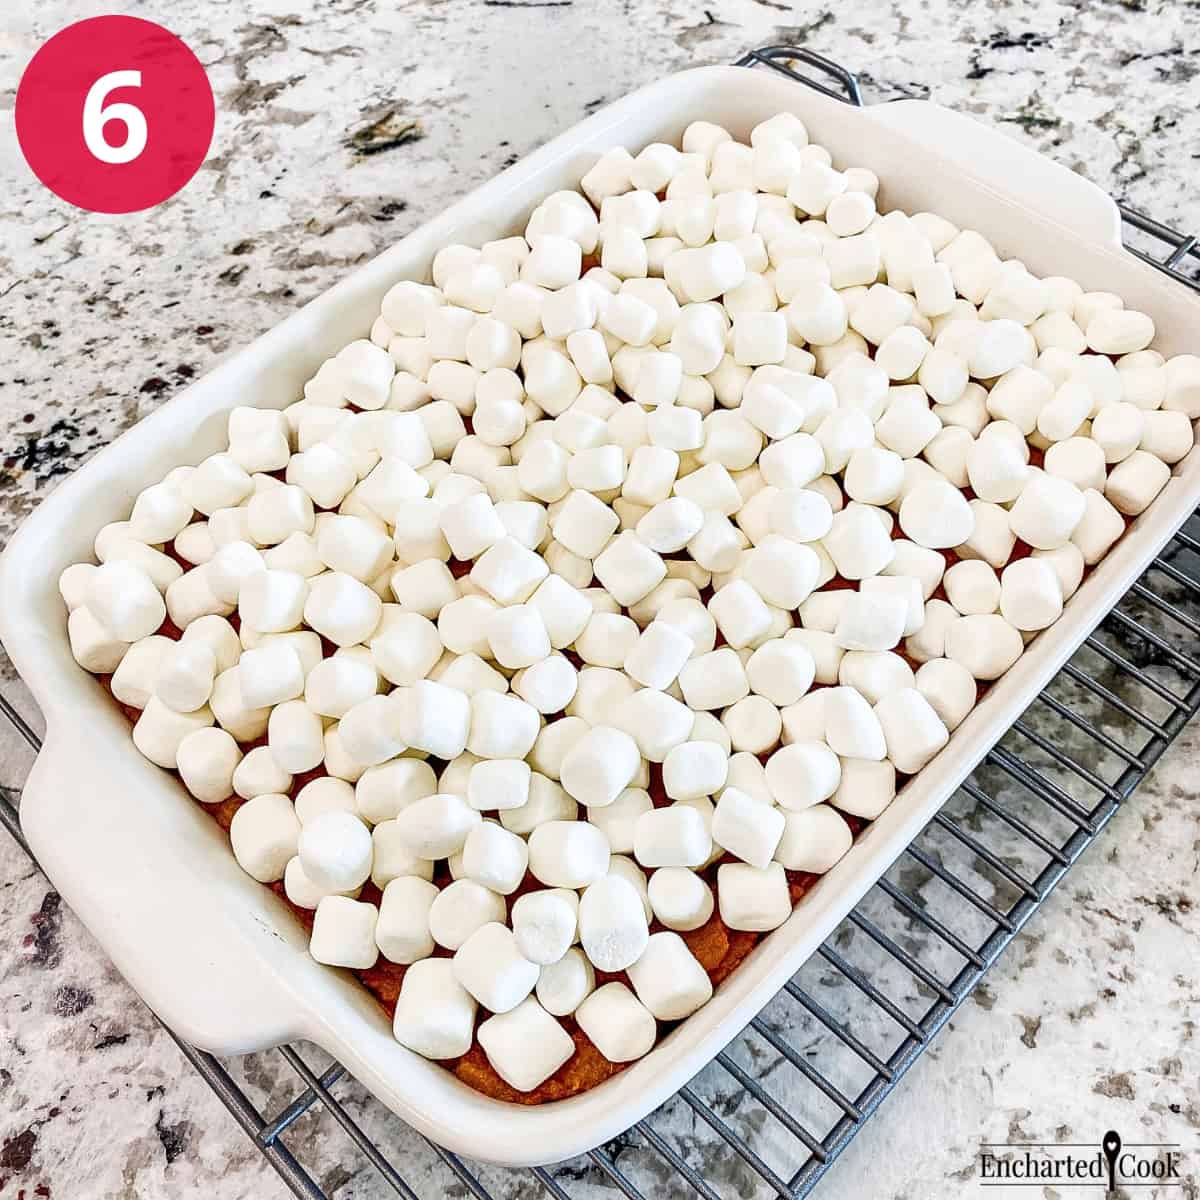 Process Photo 6 - Miniature marshmallows are placed on top of the baked sweet potatoes and ready to be toasted in the oven.